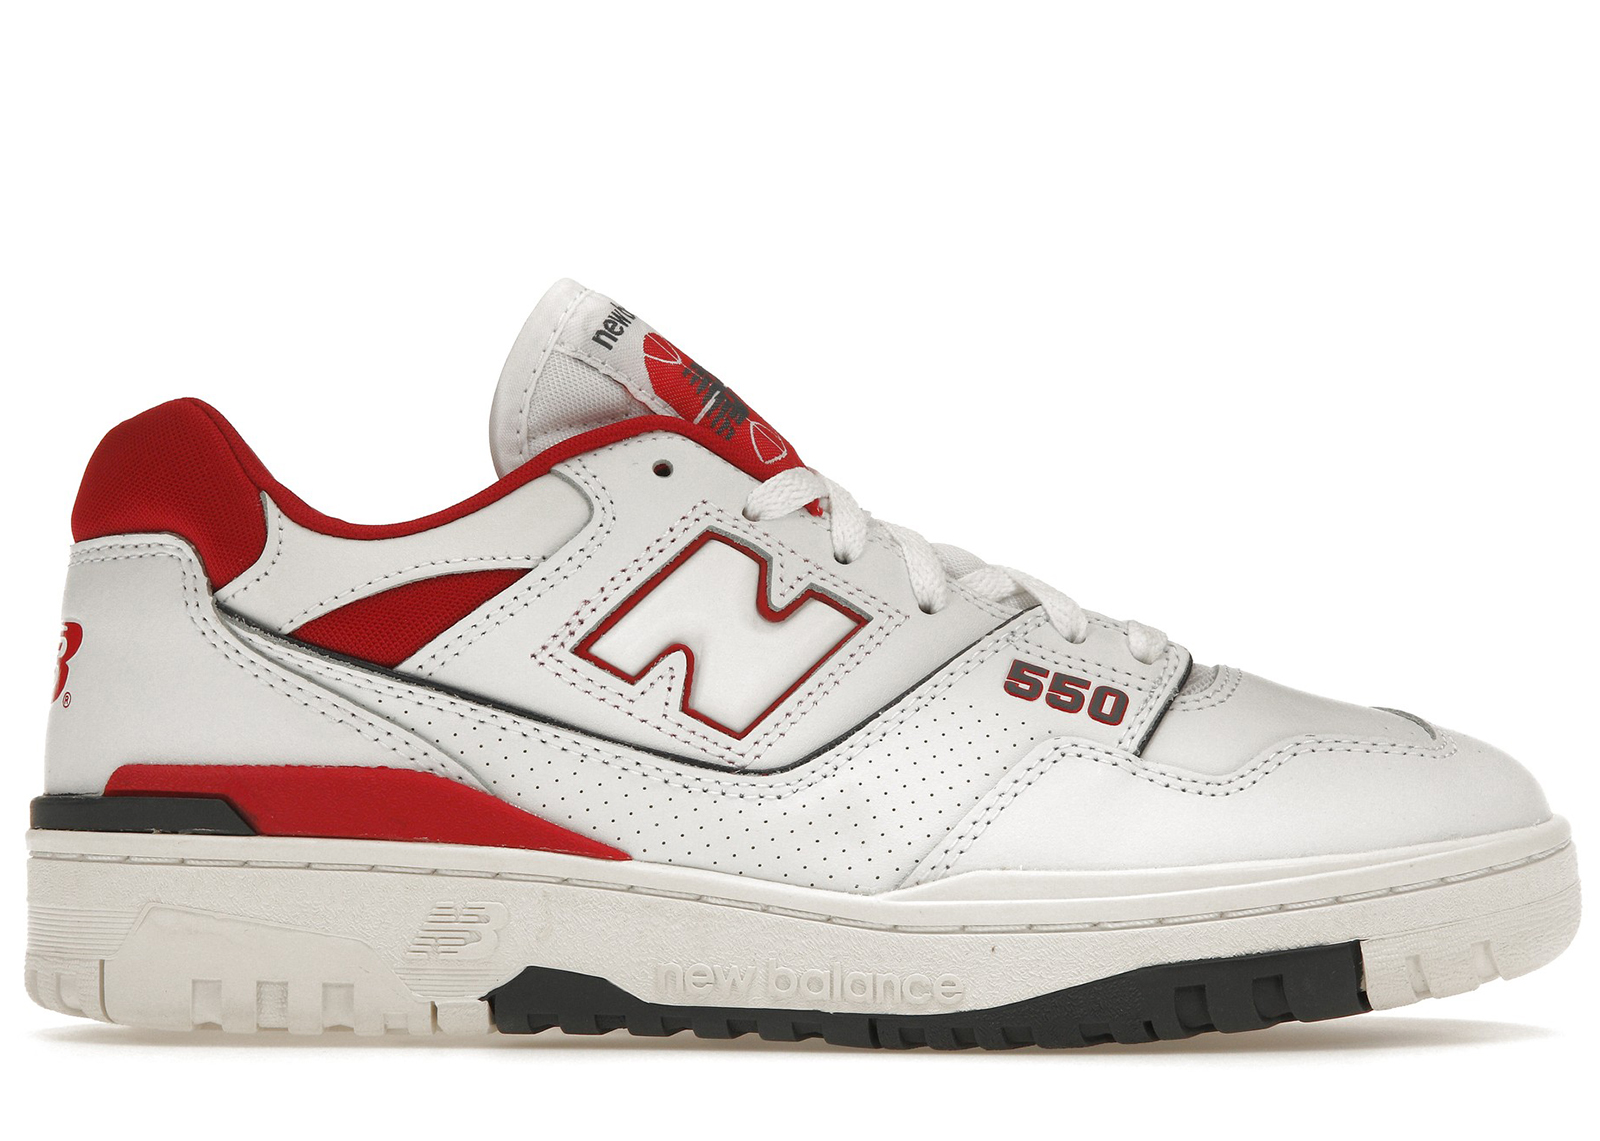 New Balance 550 White Team Red Navy (JD Sports Exclusive) Men's ...